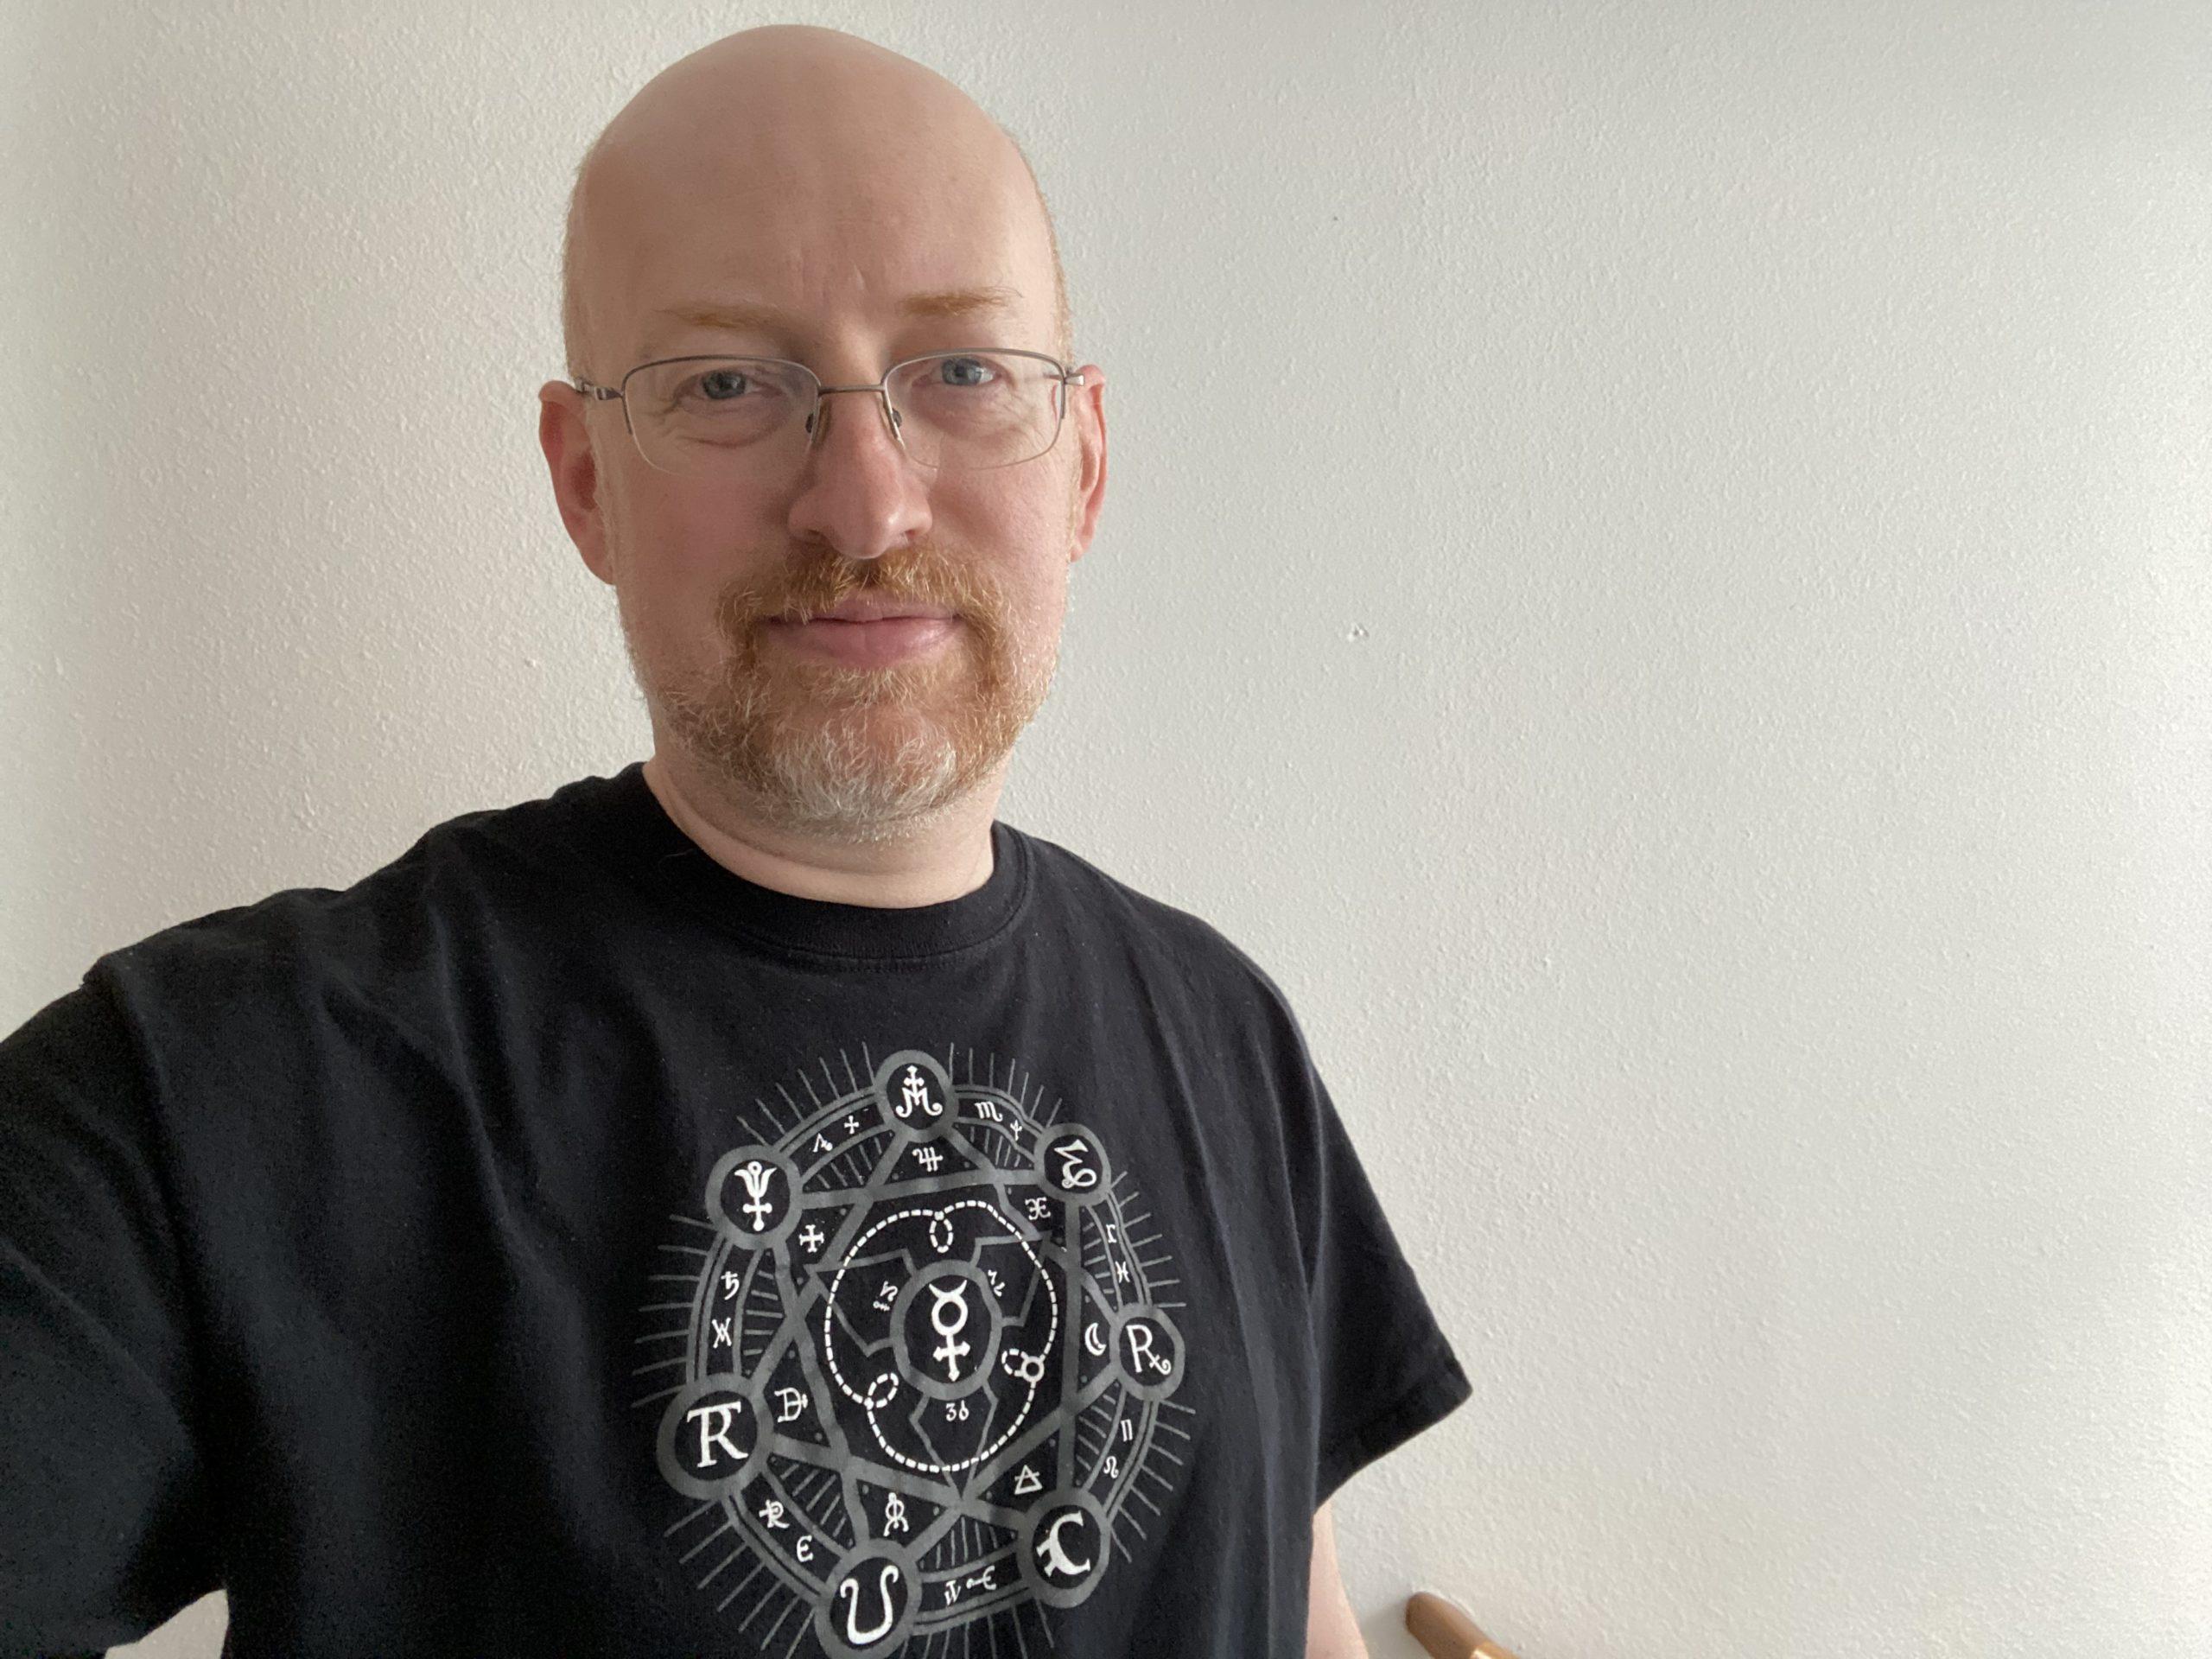 Me wearing a black t-shirt from local Seattle area goth club The Mercury. The design looks like a magic protective sigil.